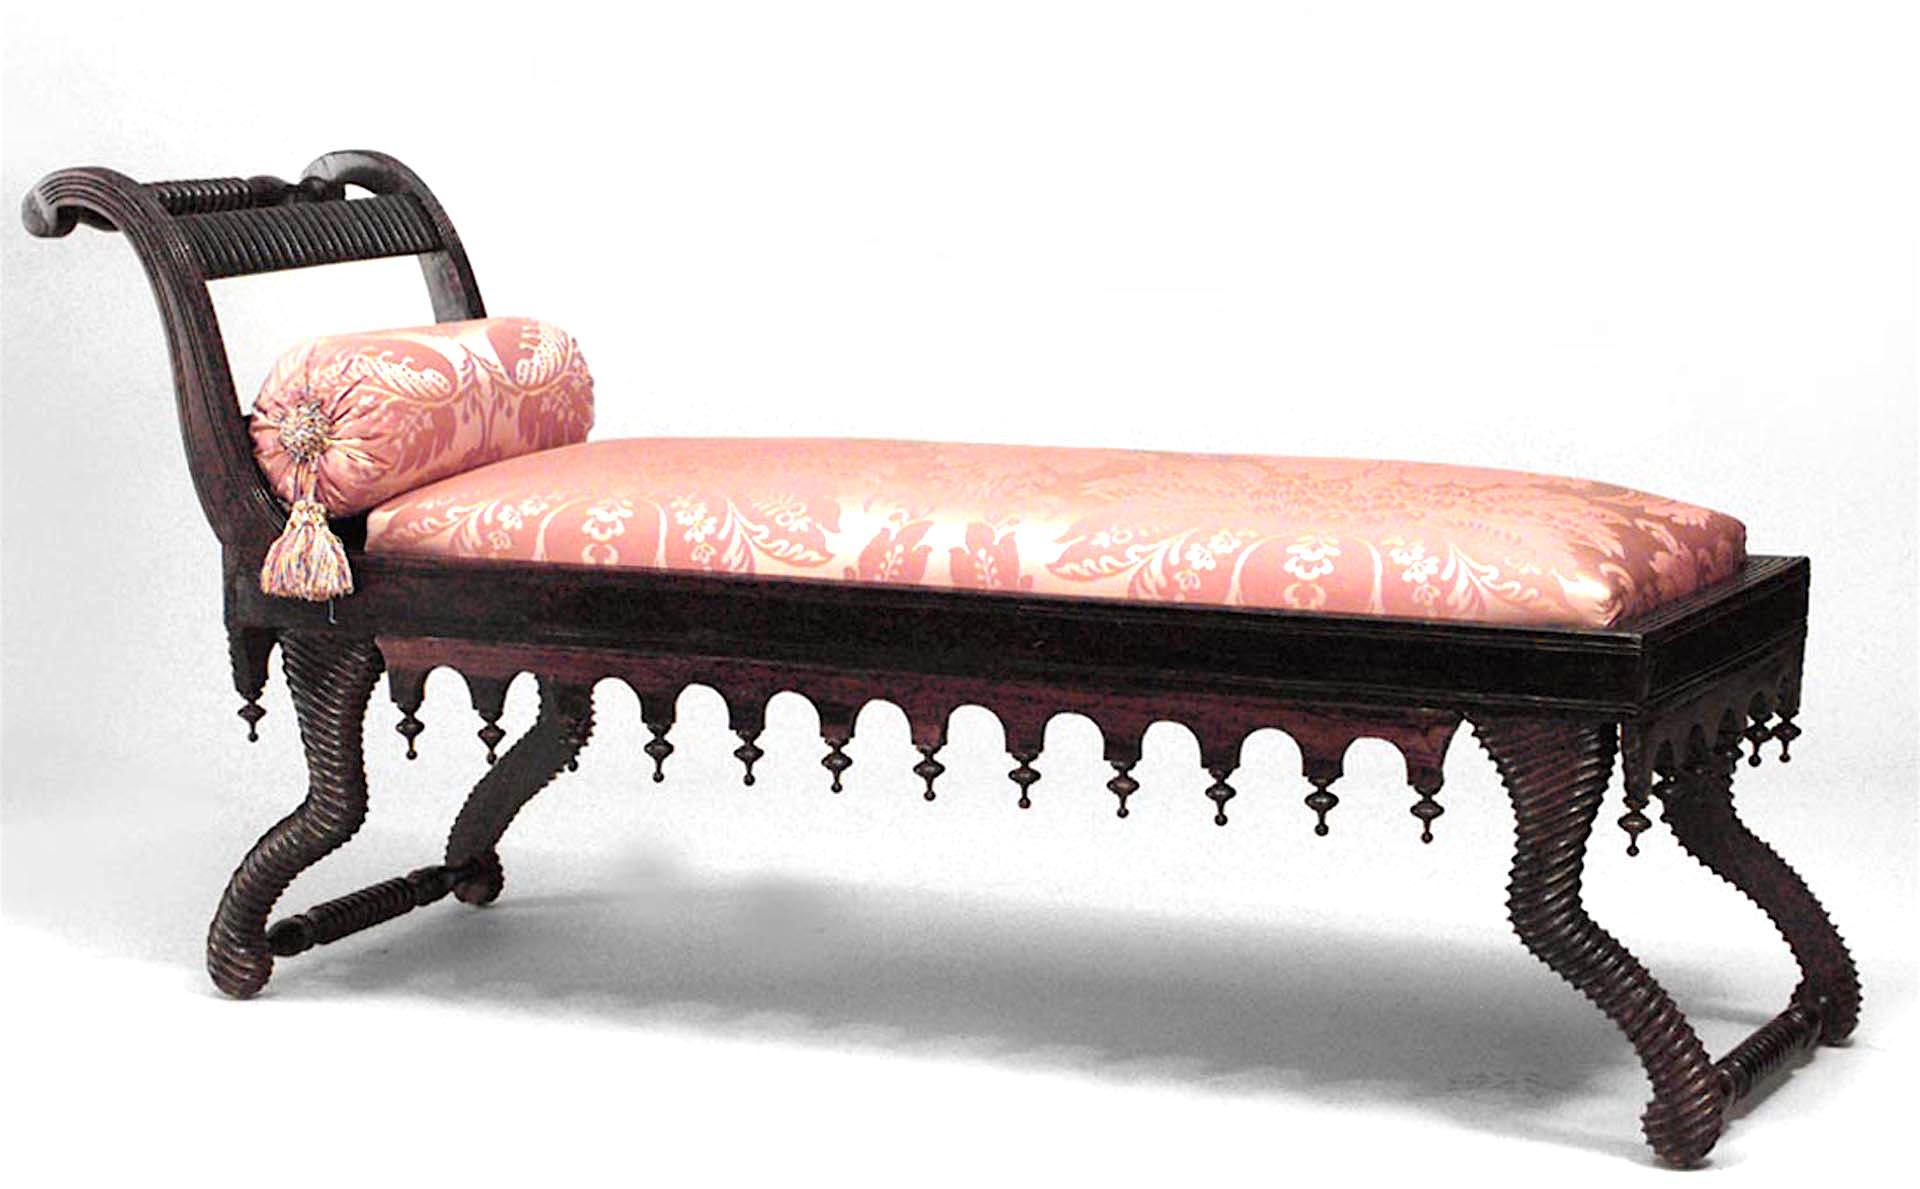 English Regency-style (19th Century) rosewood chaise with swirl and finial design with rust color upholstery.
